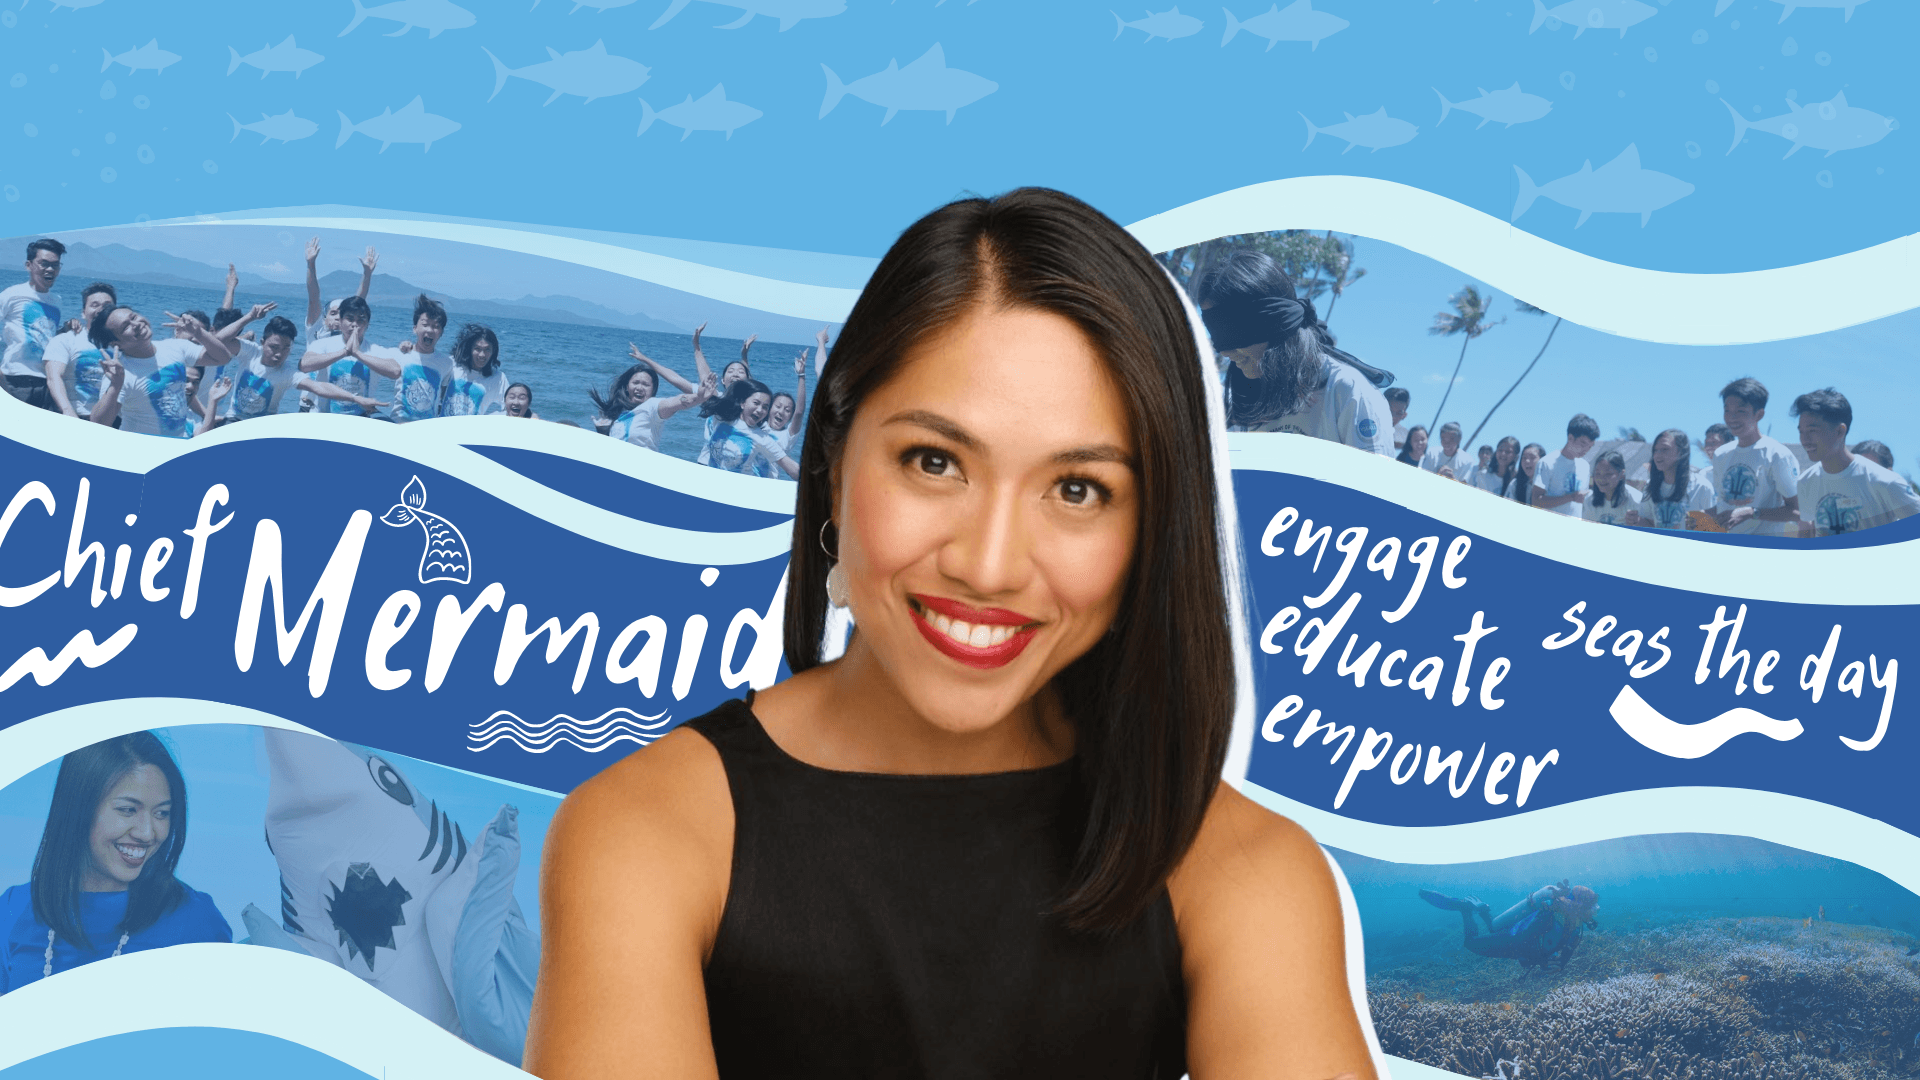 How this real-life mermaid empowers ‘seatizens’ for marine conservation one shark pun at a time